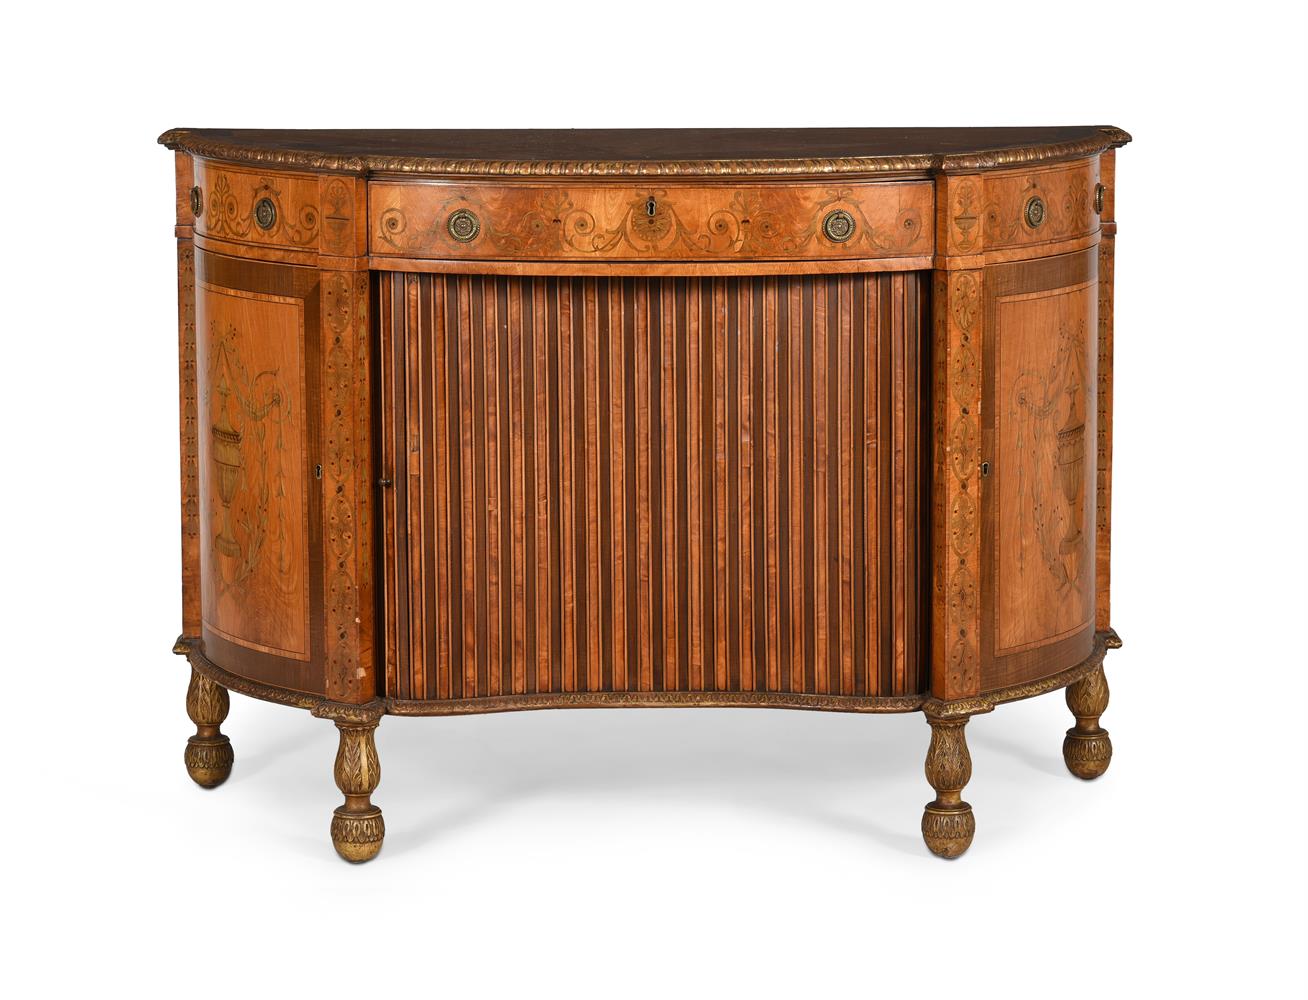 Y A SATINWOOD, NEOCLASSICAL MARQUETRY AND PARCEL GILT COMMODE OR SIDE CABINET, 19TH CENTURY